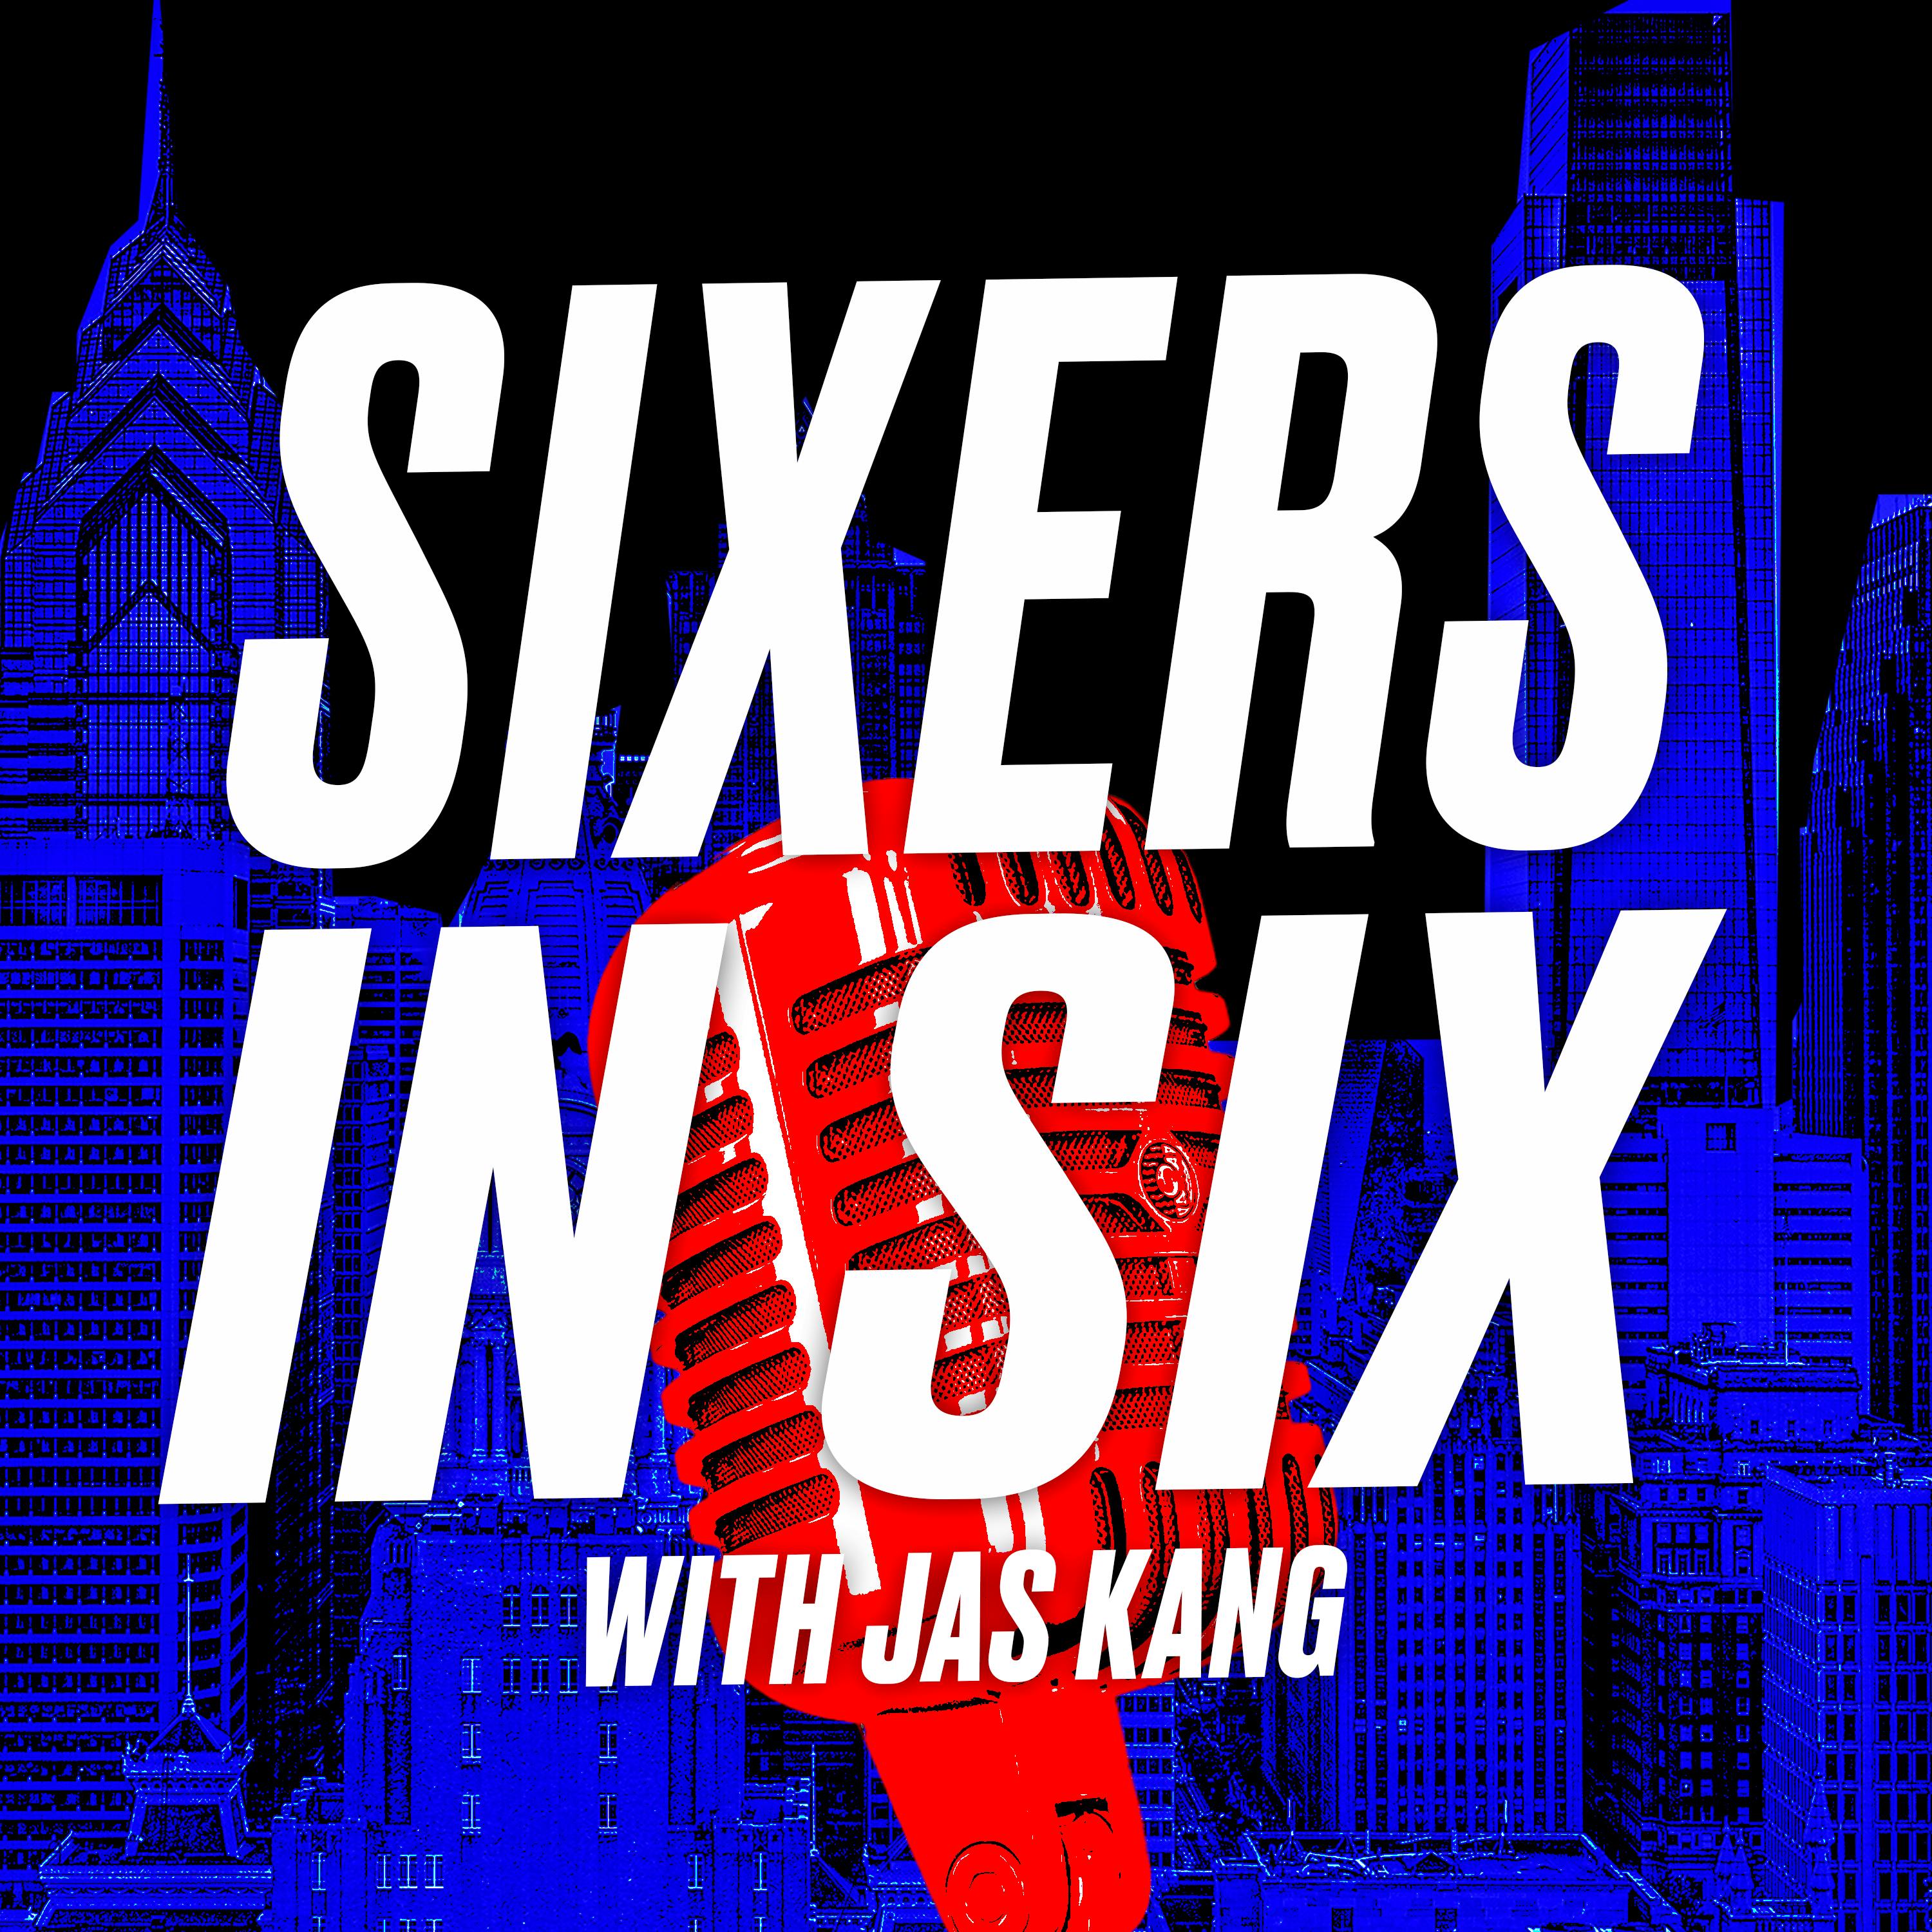 Harden and Embiid help the Sixers sweep the season-series over LeBron James and the Lakers. Sixers in Six: With Jas Kang